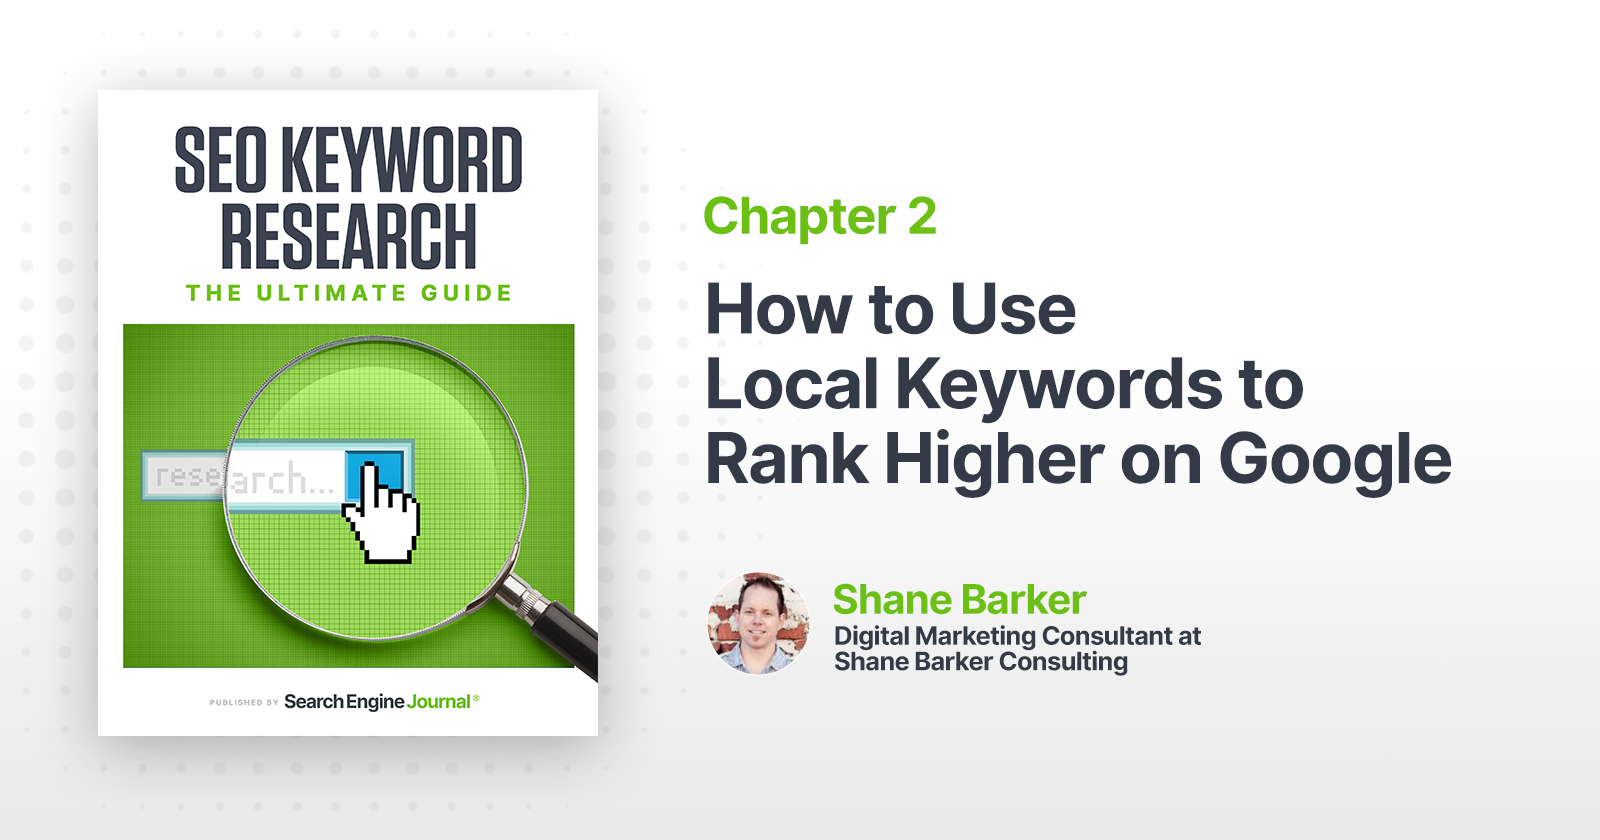 How to Use Local Keywords to Rank Higher on Google